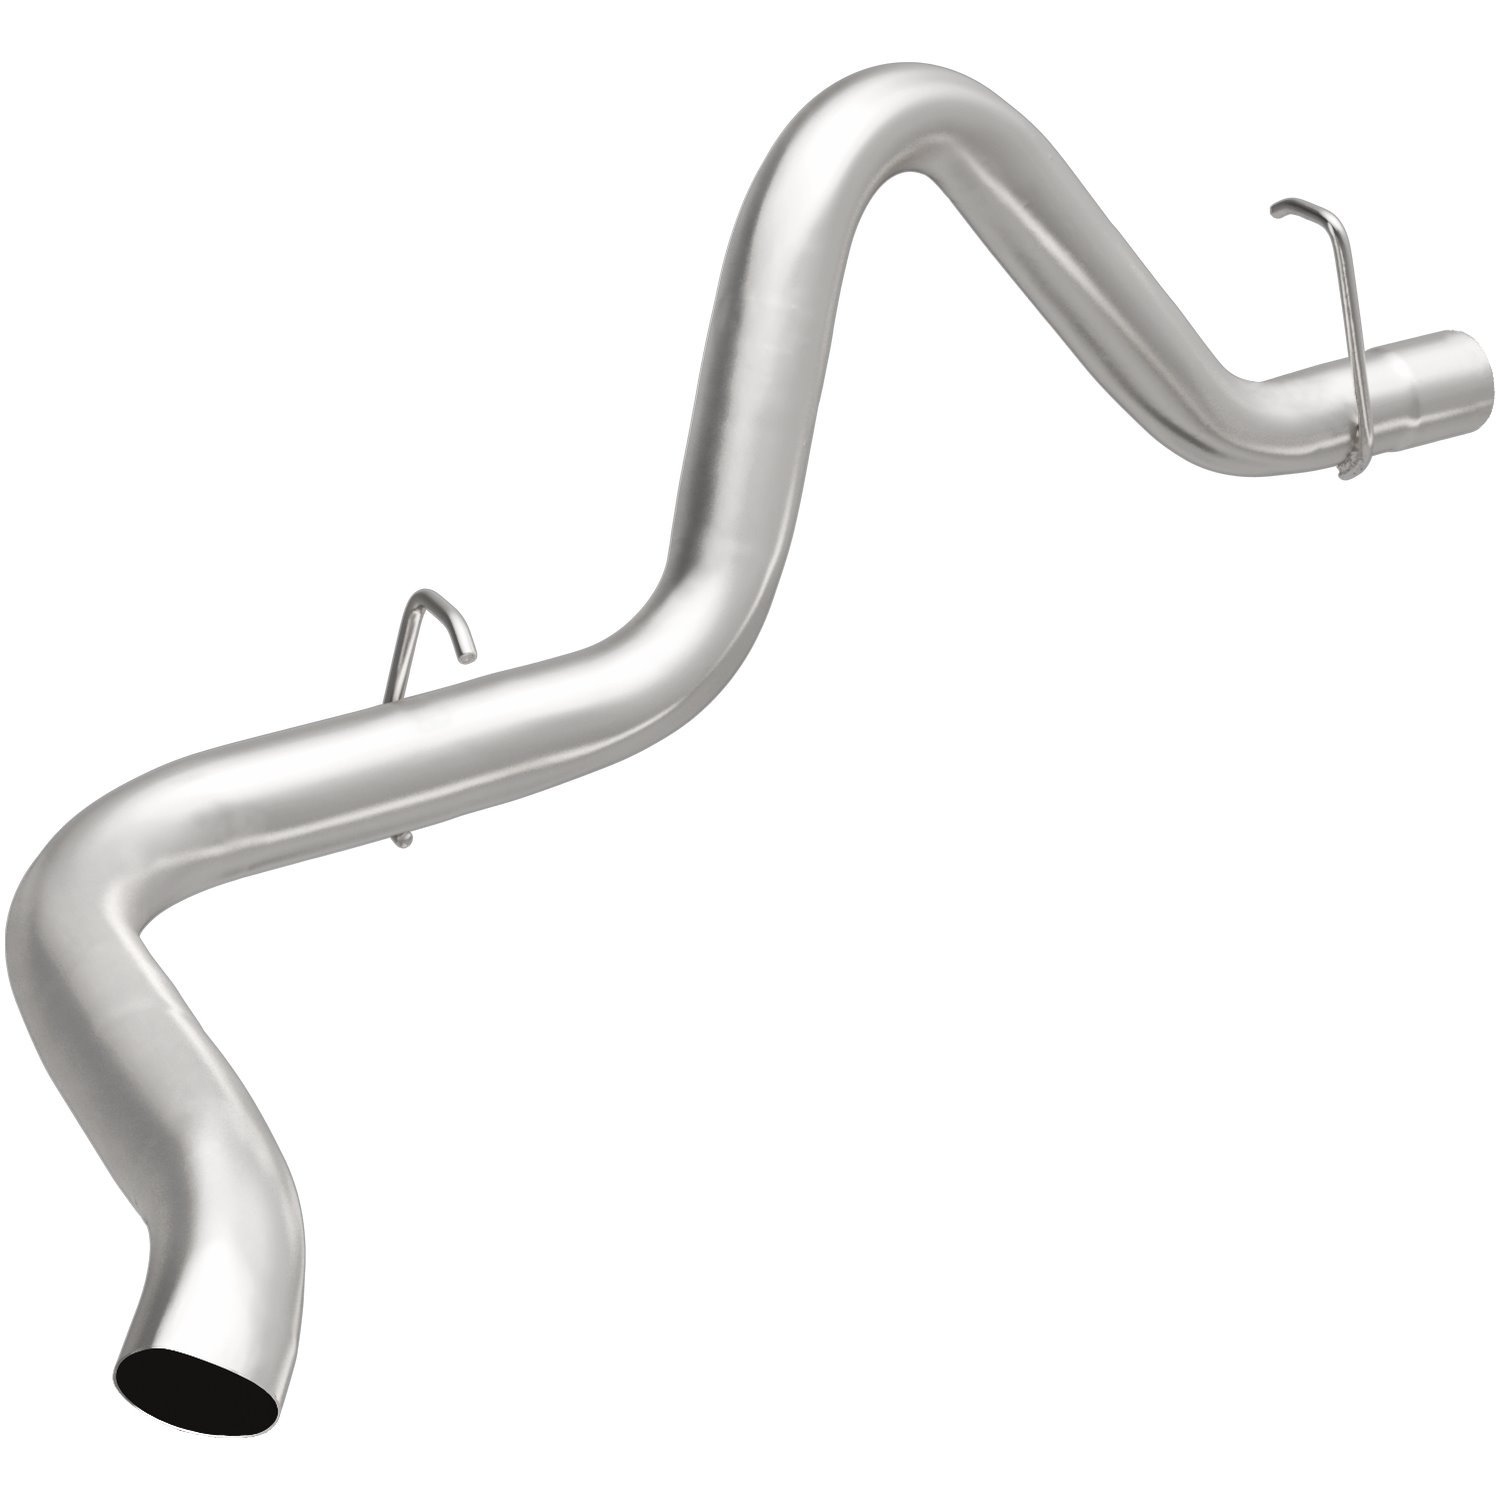 Direct-Fit Exhaust Tail Pipe, 1994-1995 GM C/K 1500/2500,